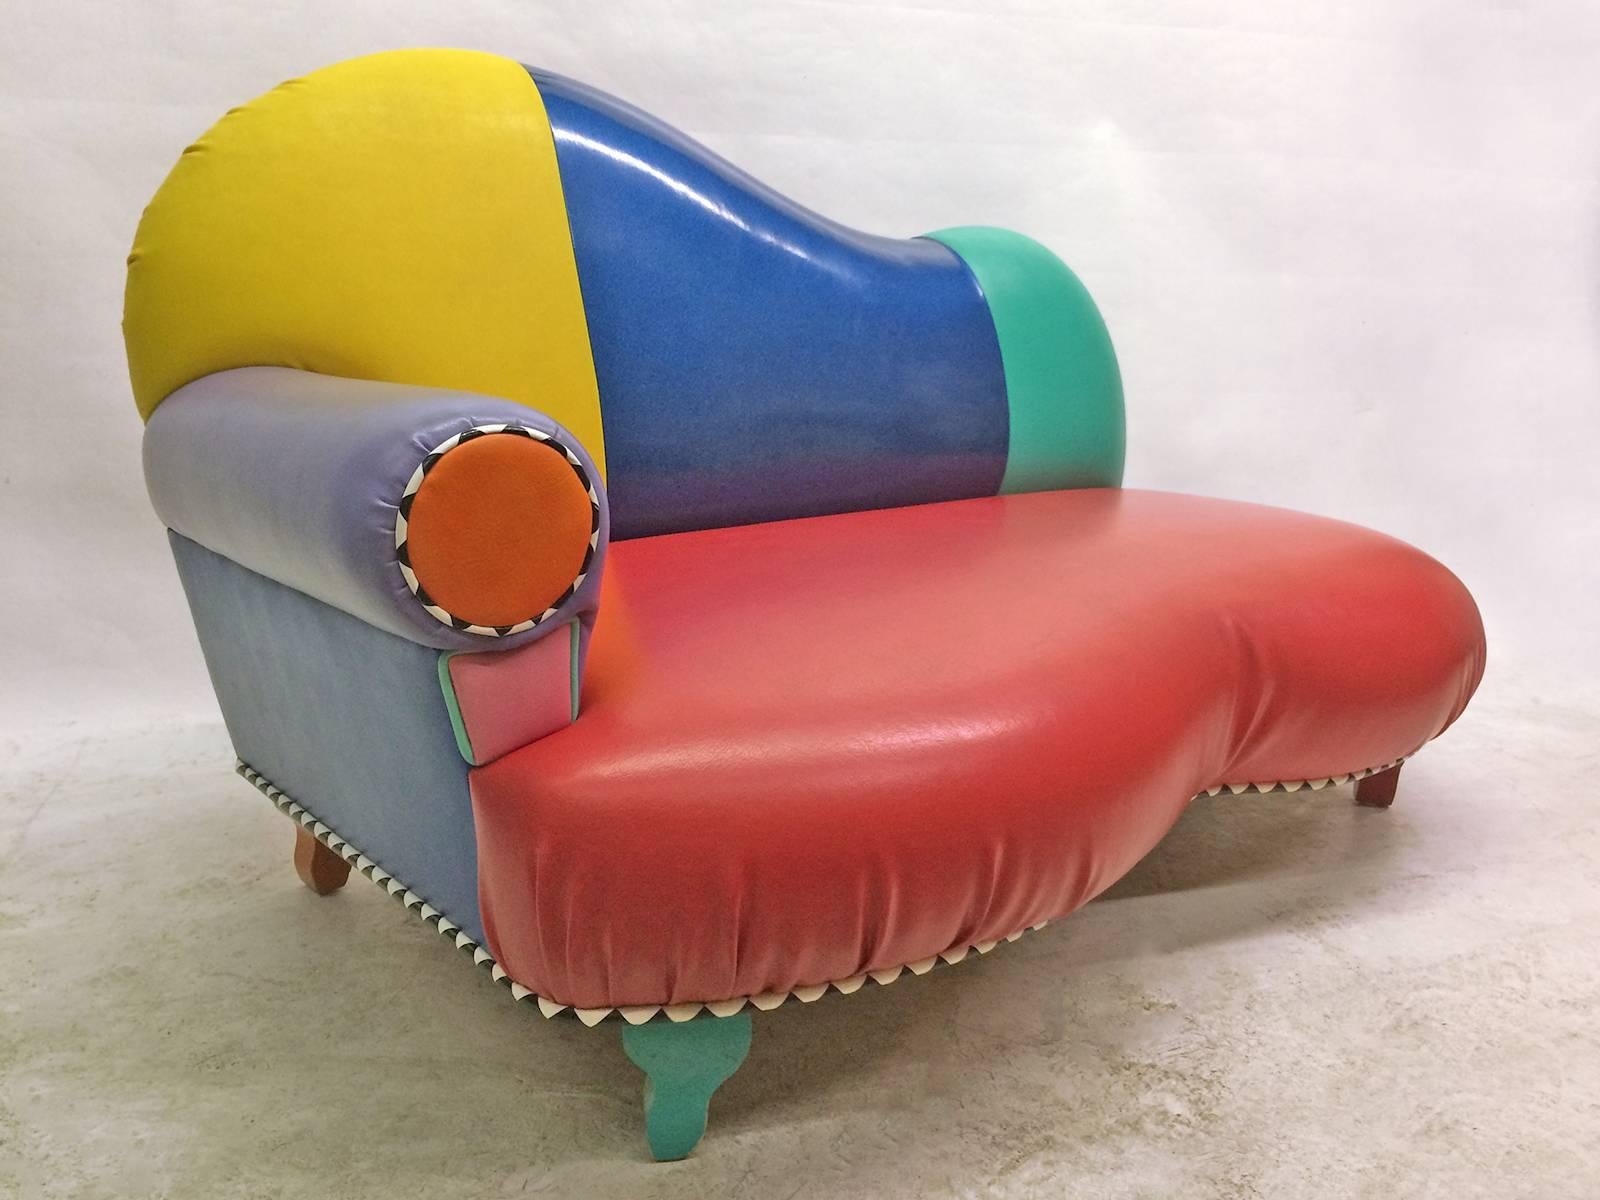 This playful Memphis inspired sofa, loveseat or chaise by 1980s Los Angeles designer Harry Siegel is finished in primary and secondary colored vinyl. Detailing is completed with black and white pyramid piping and legs in green, red, orange and